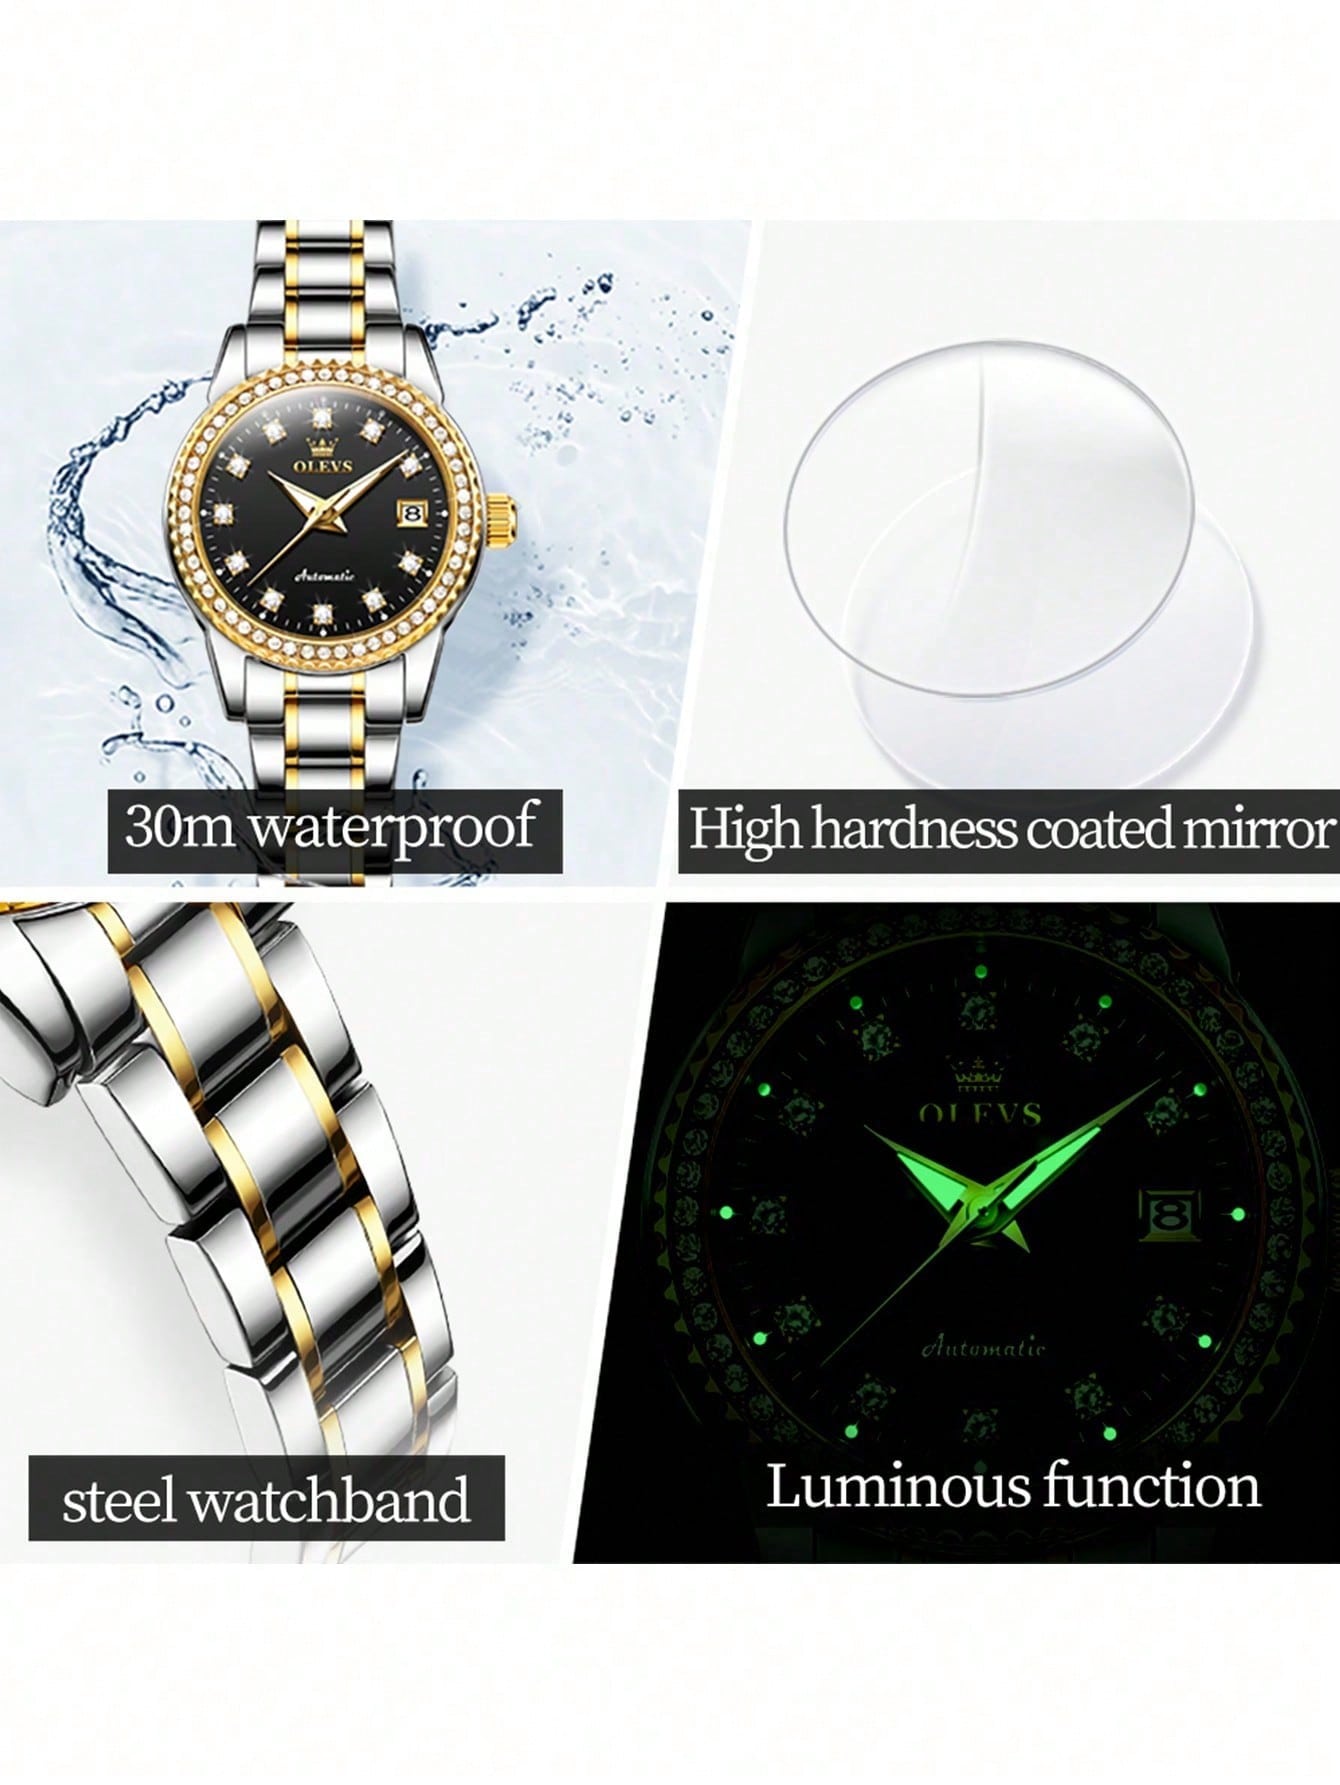 Olevs Original Diamond Dial Automatic Mechanical Women's Watch, Fashionable And Waterproof, Glowing Effect And Stainless Steel